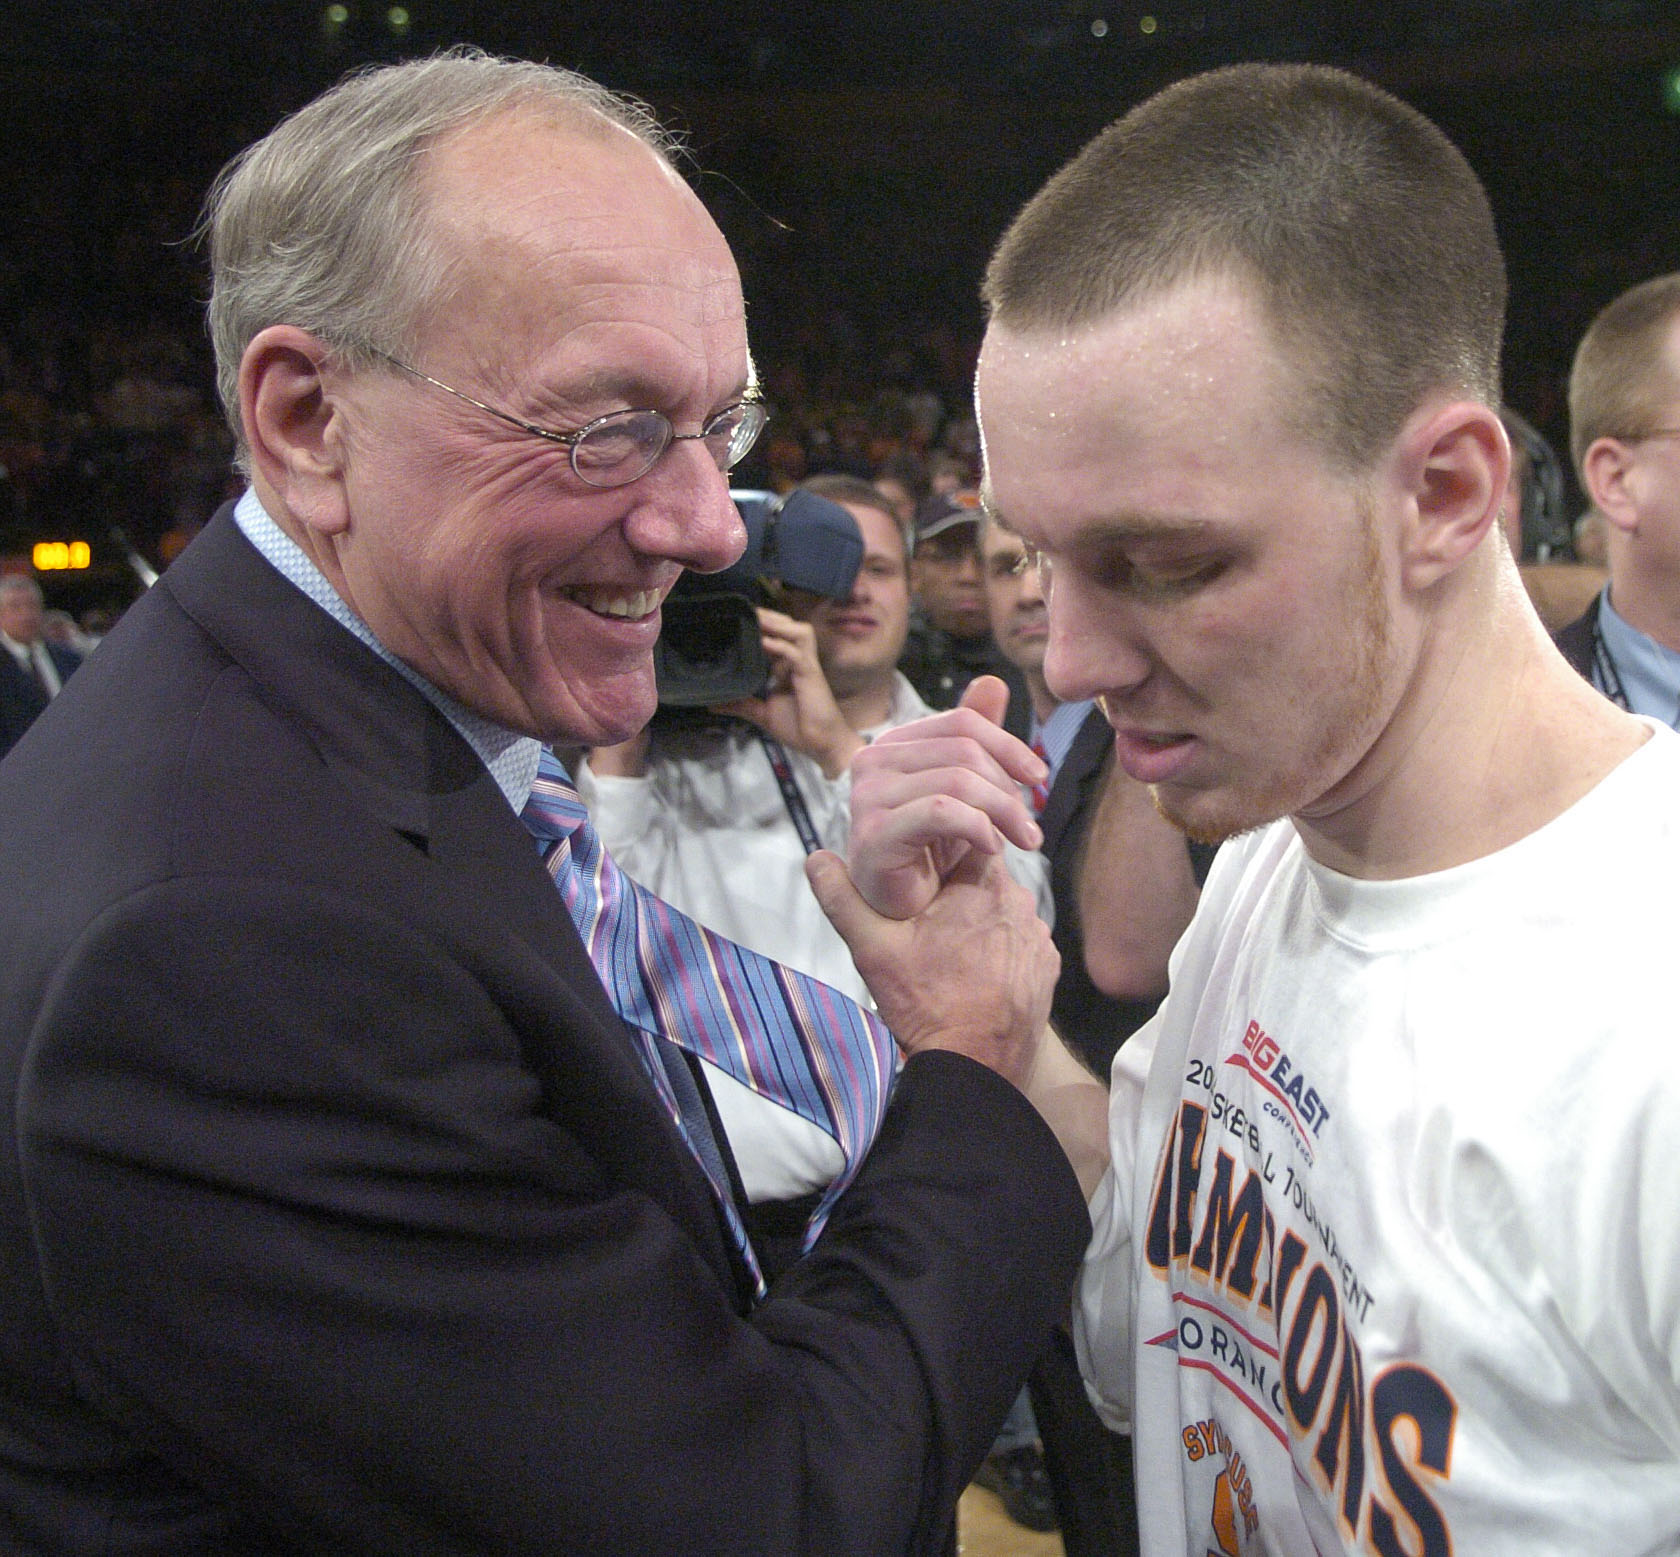 The big wins and defining moments of Jim Boeheim’s Syracuse basketball tenure